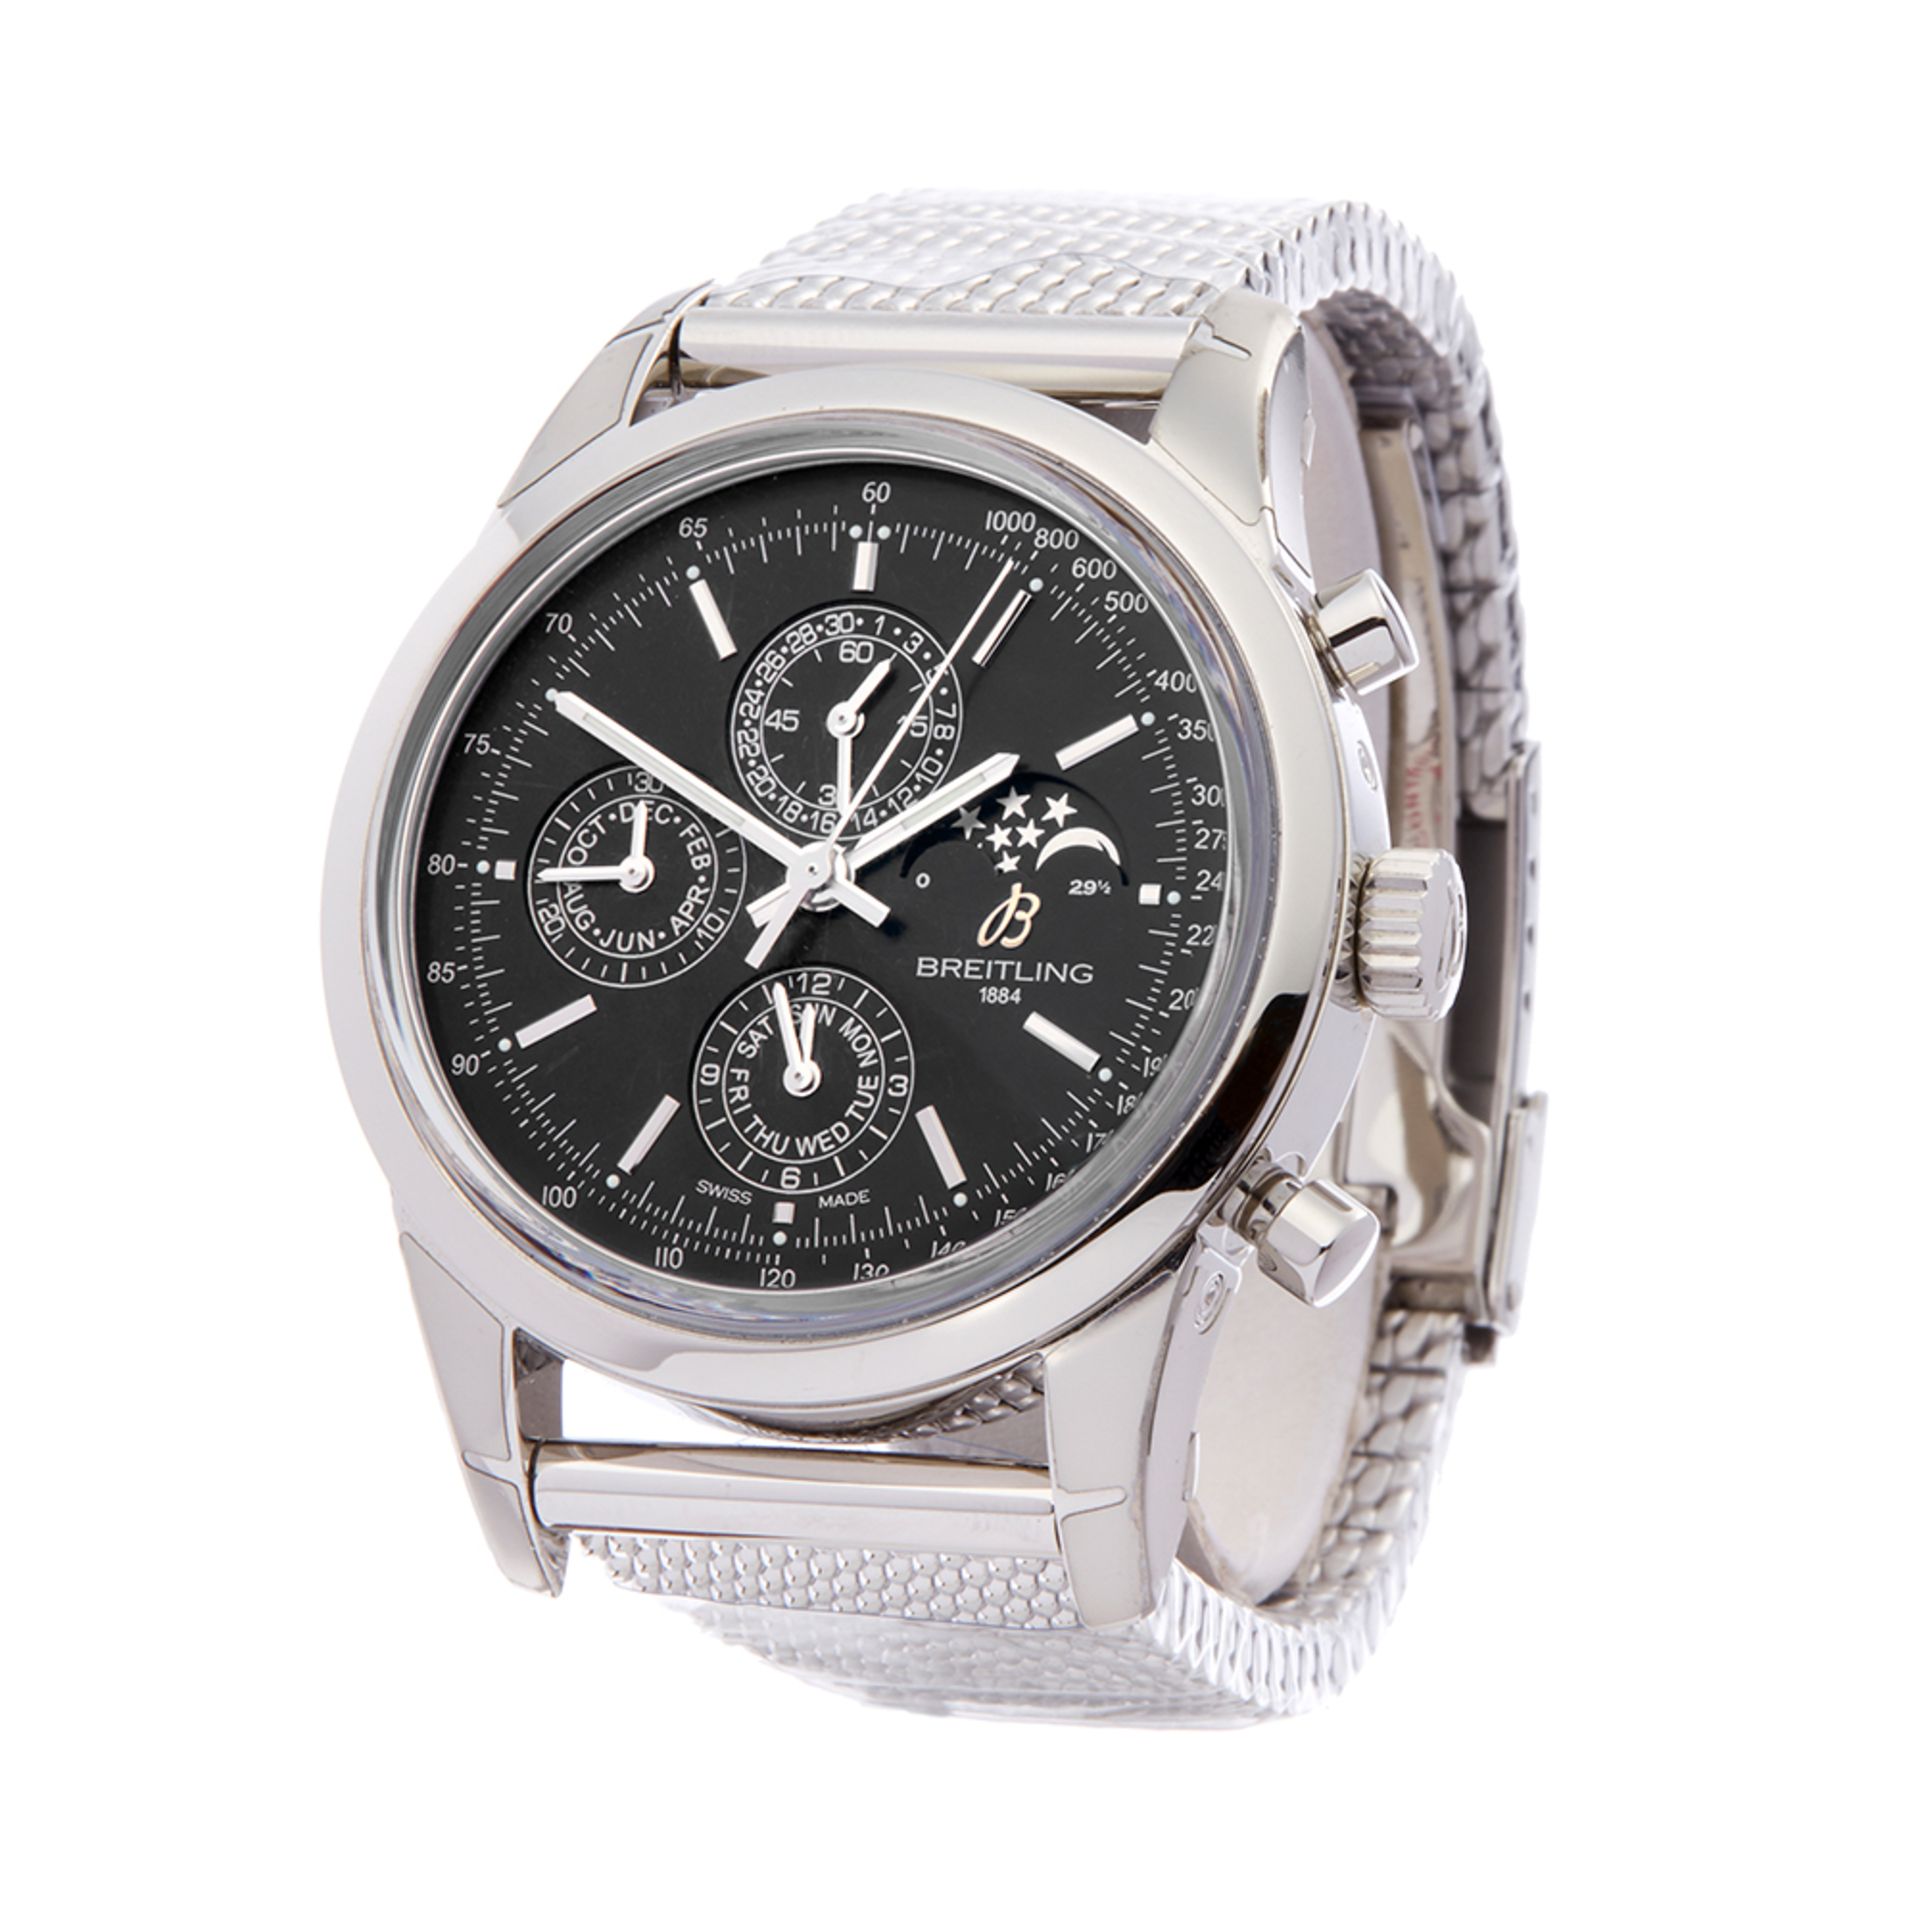 Breitling Transocean 1461 Stainless Steel - A1931012/BB68 - Image 3 of 8